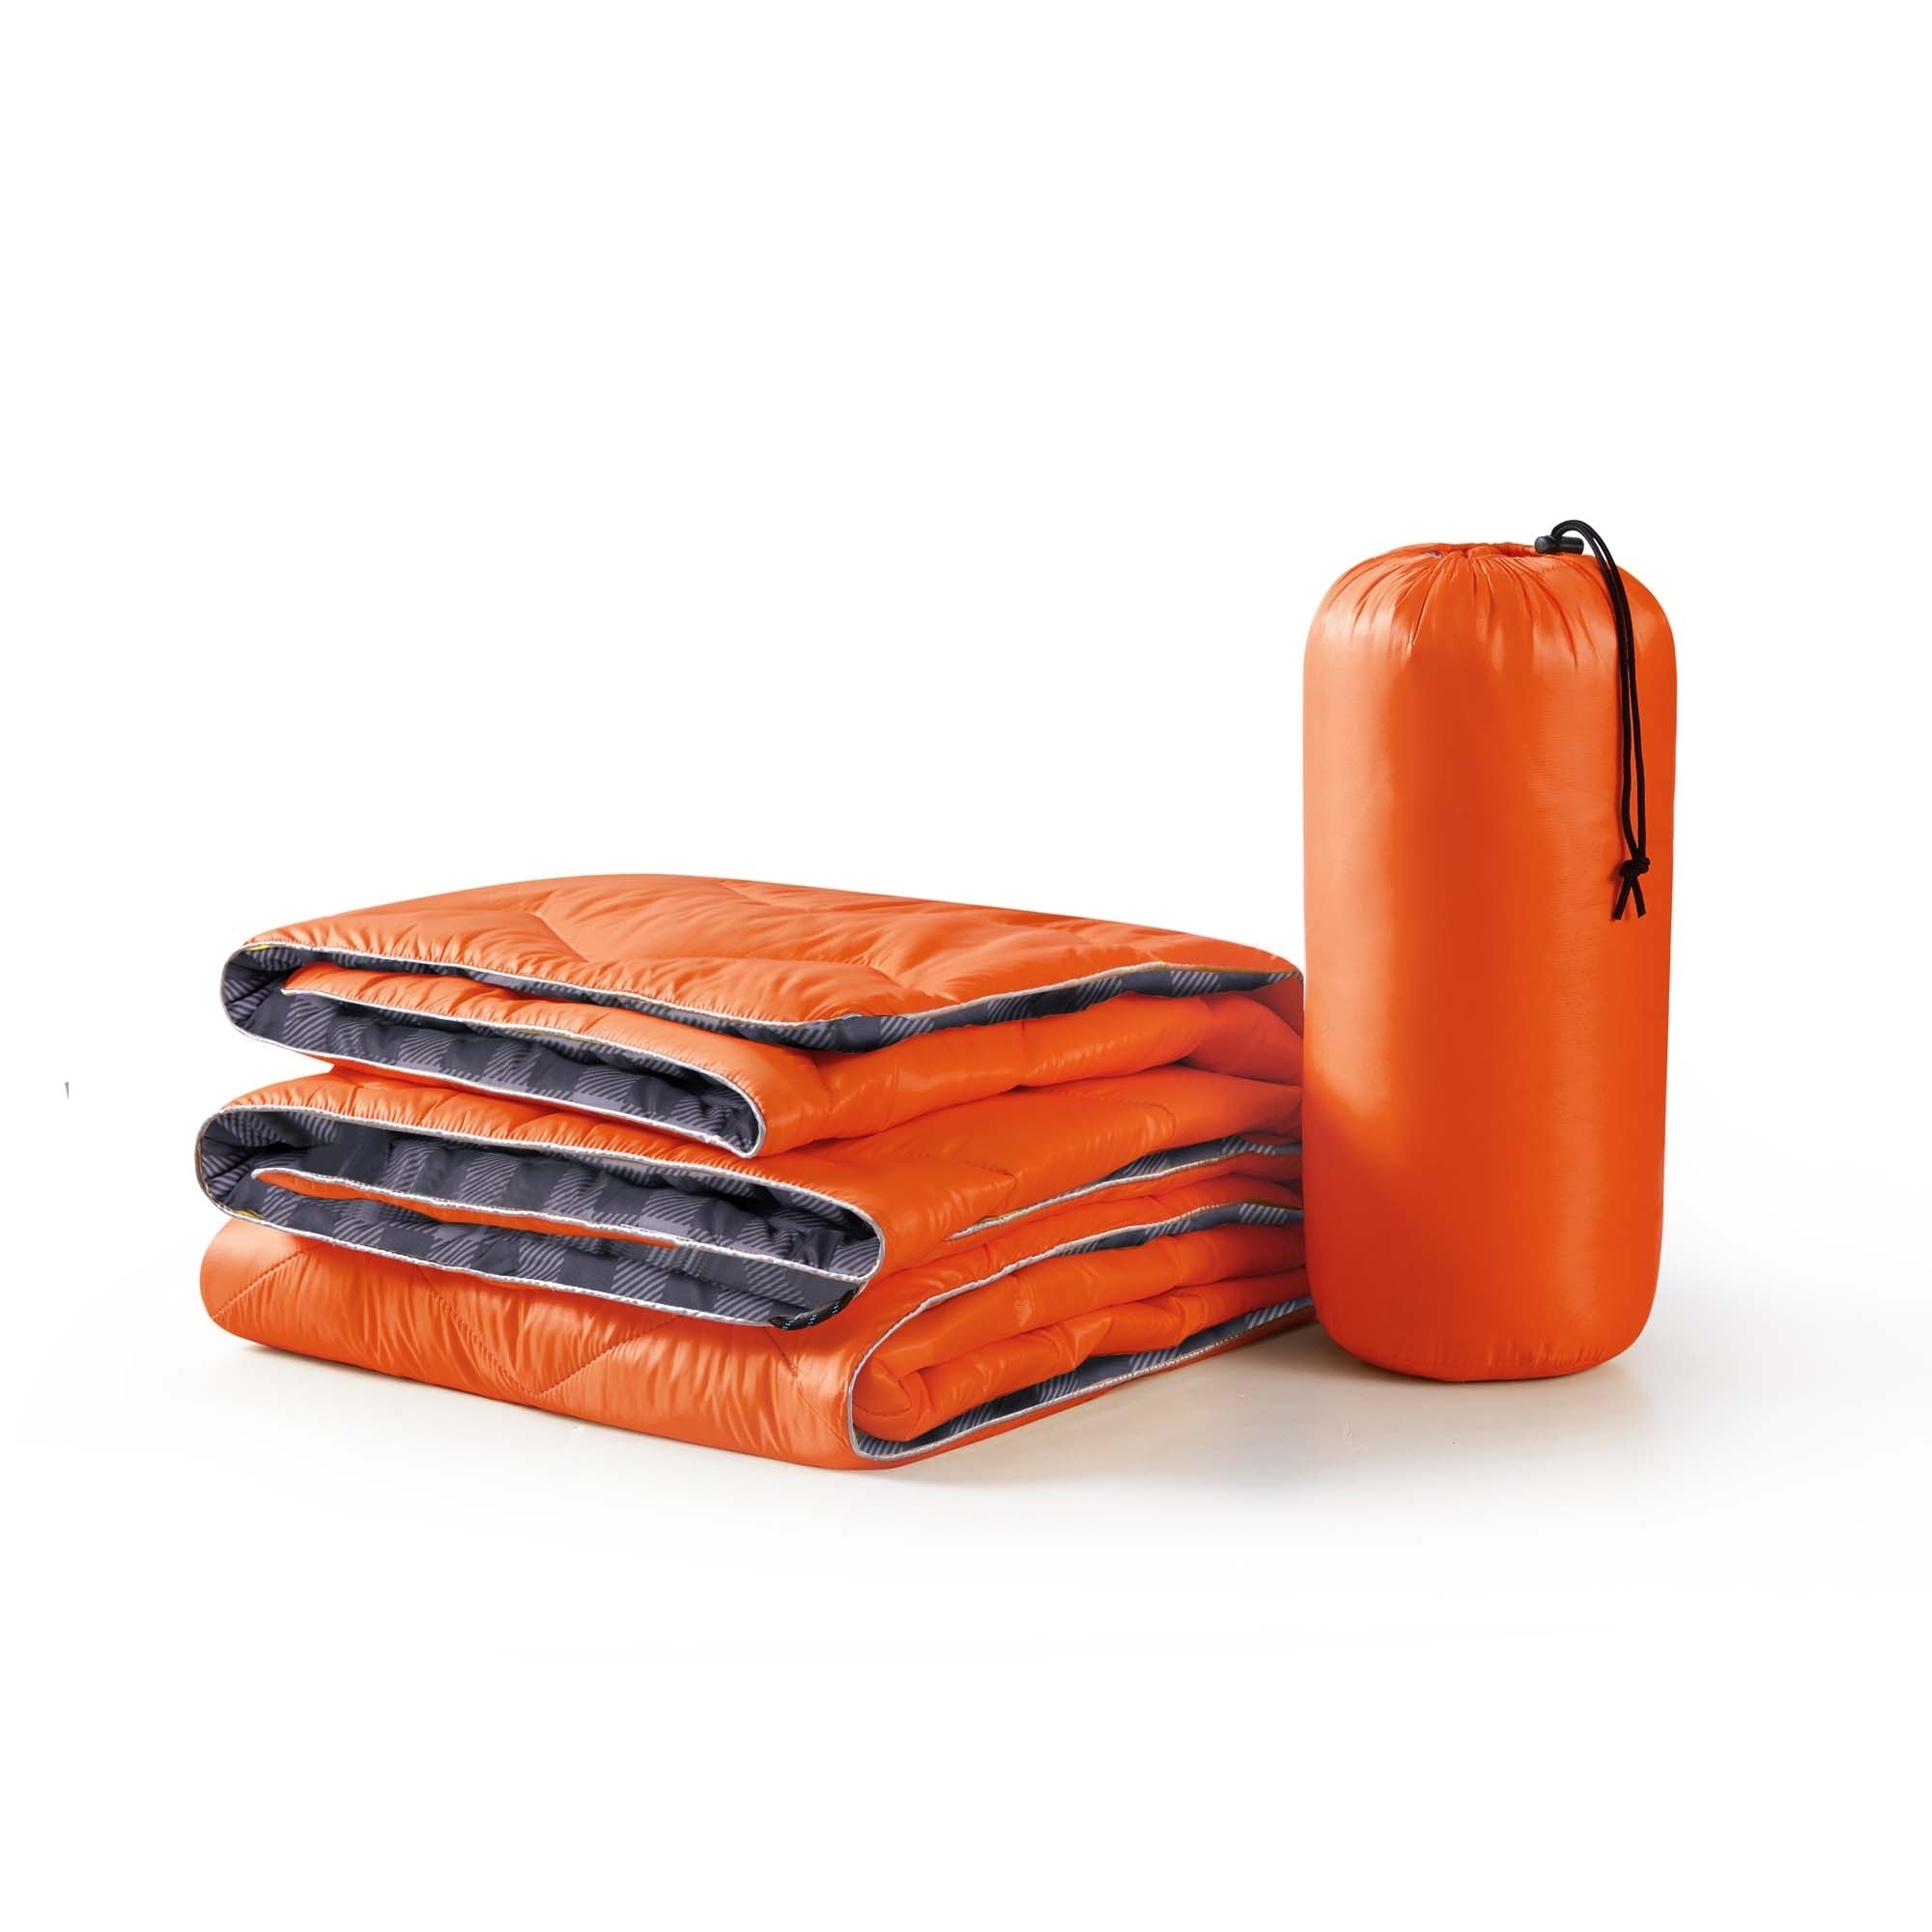 Waterproof Outdoor Blanket Packable for Camping, Hiking, Picnic and Travel - Orange, King